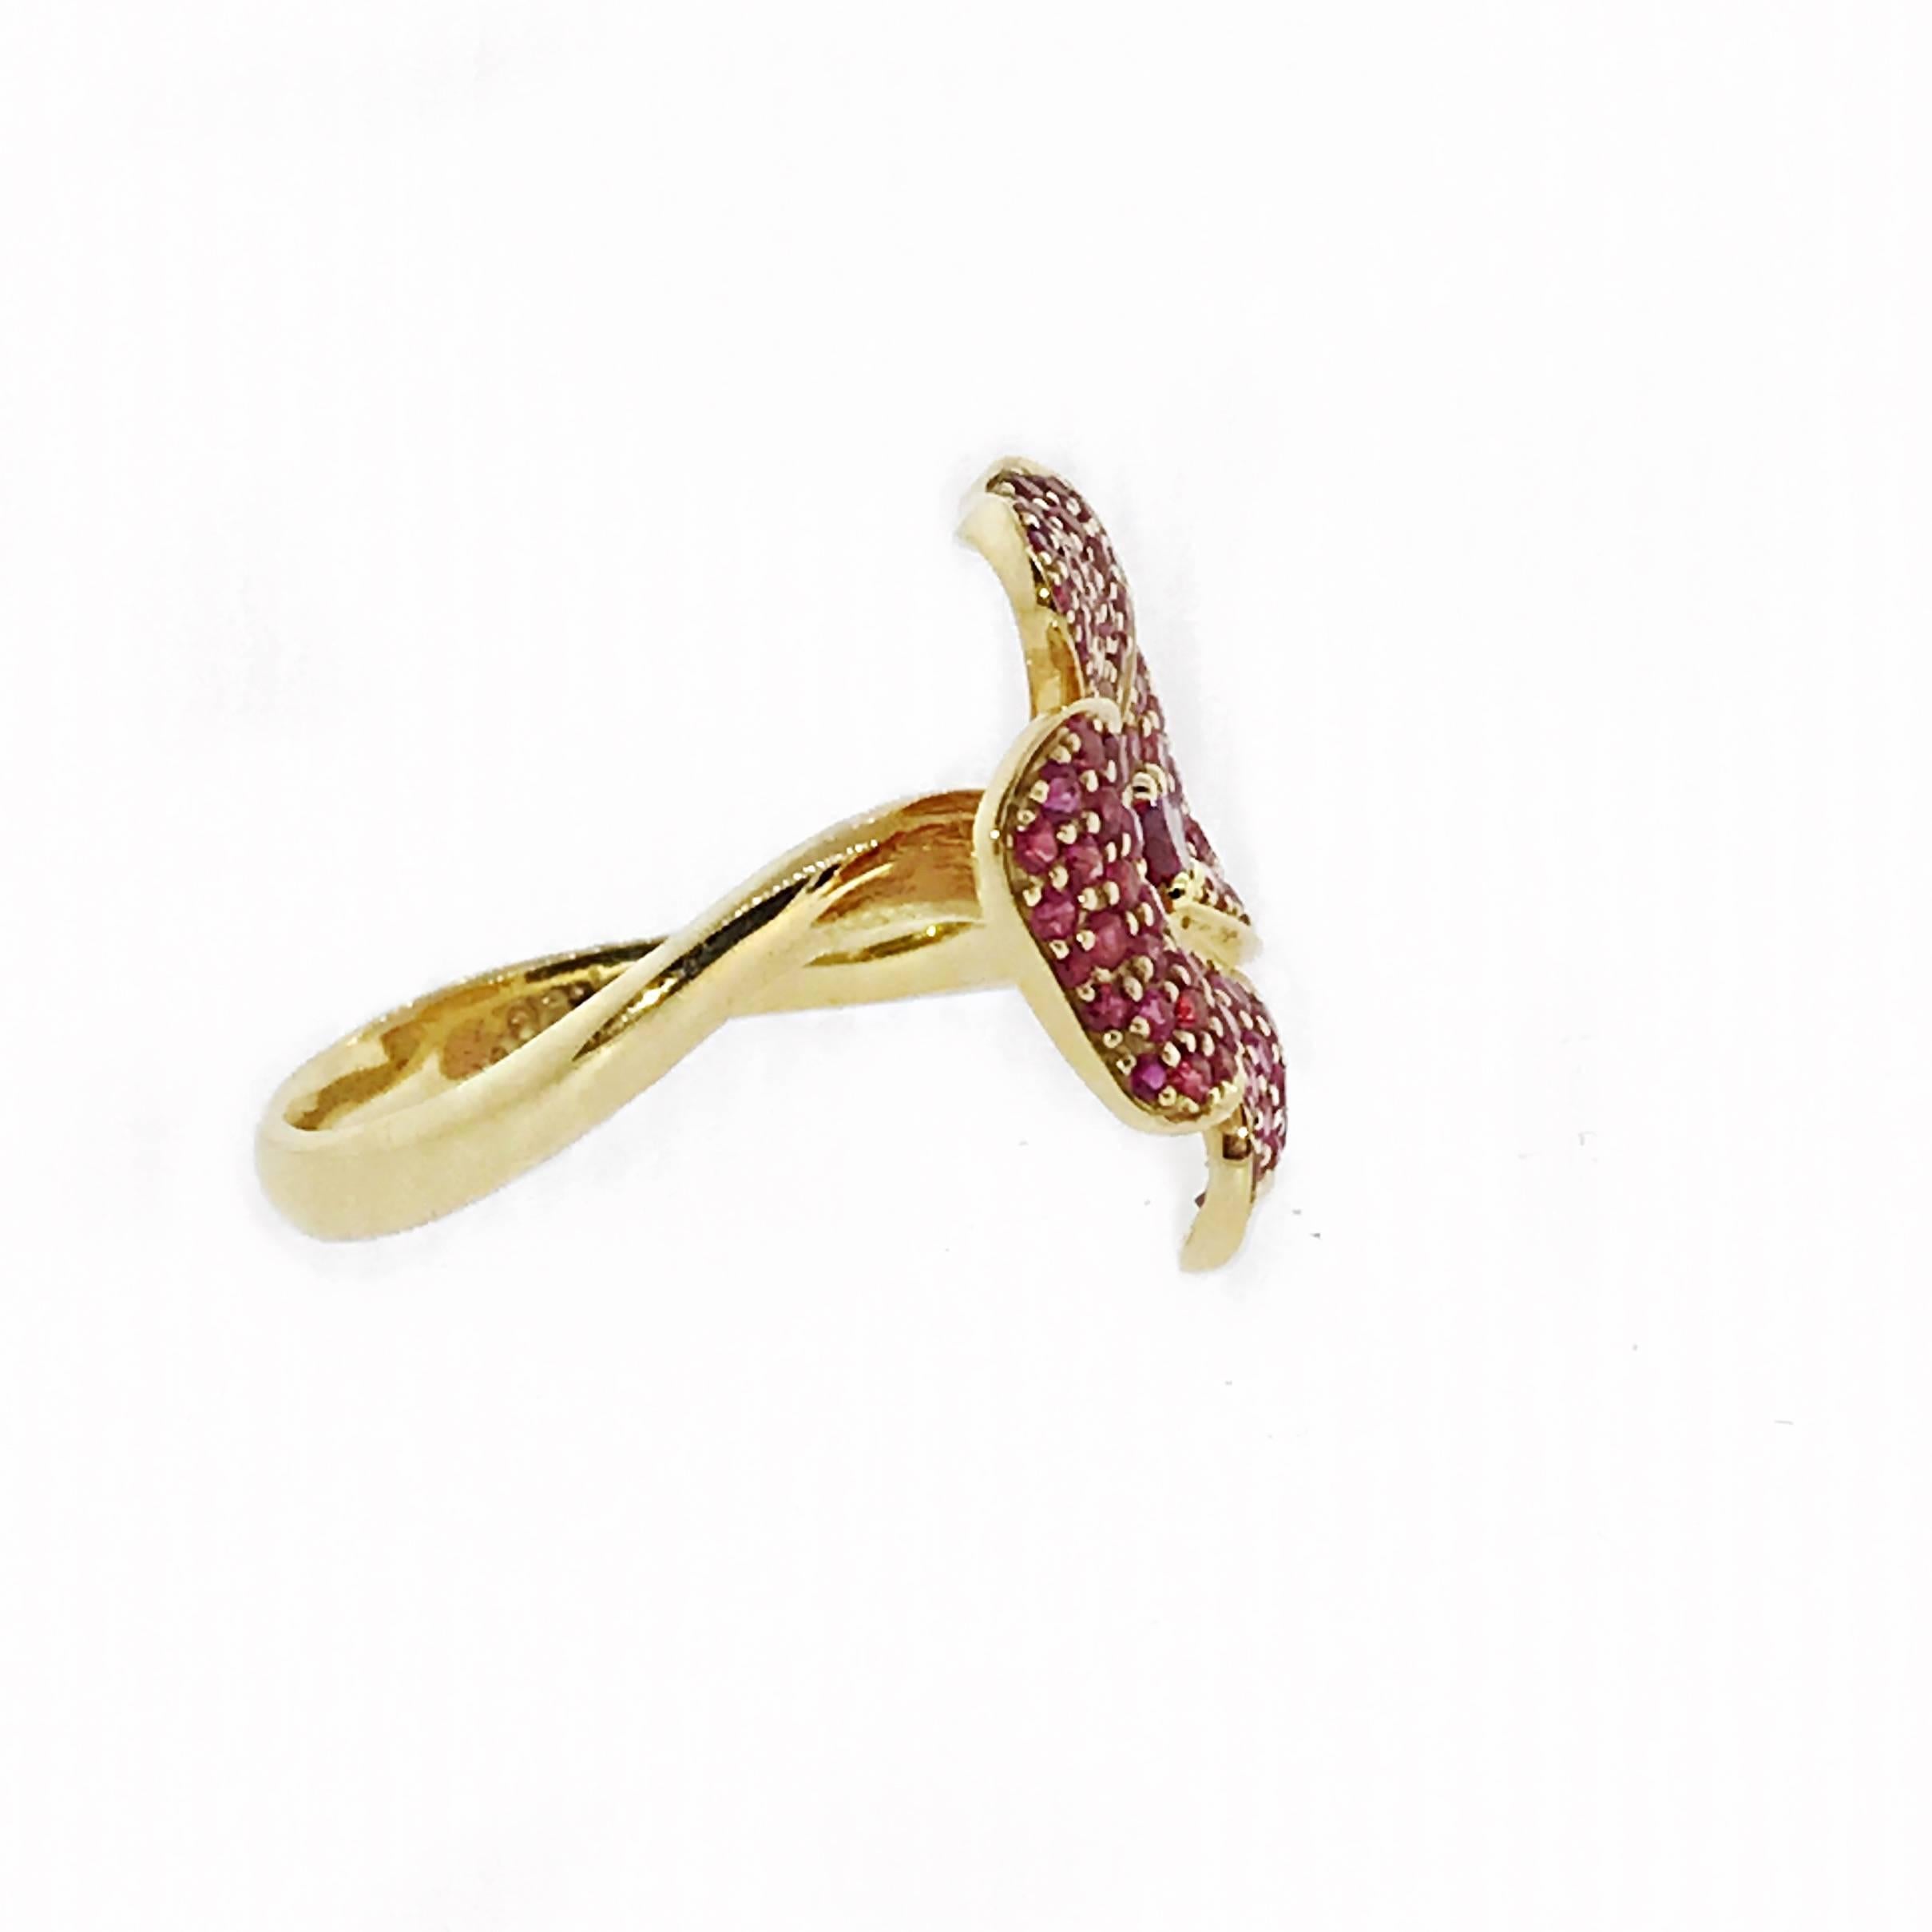 Ruby and pink sapphire flower ring in 18k yellow gold. Ruby is the July birthstone. Perfect as an anniversary gift, push present or birthday present. 

The flower ring has a ruby center stone with pink sapphires emanating from the center with in a